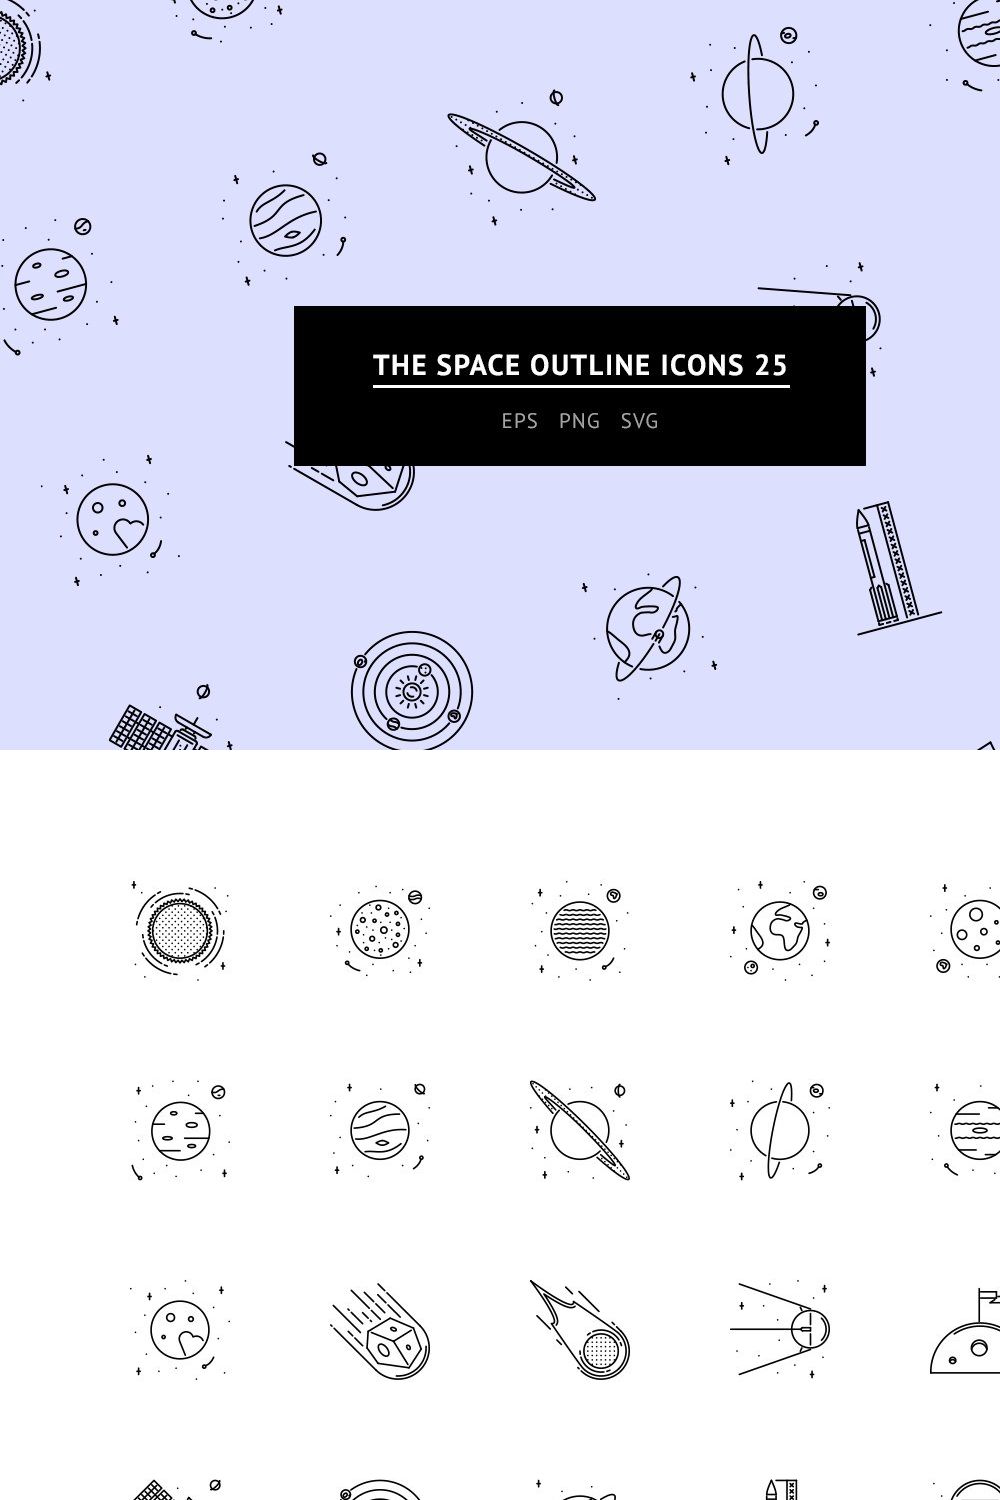 The Space Outline Icons 25 pinterest preview image.